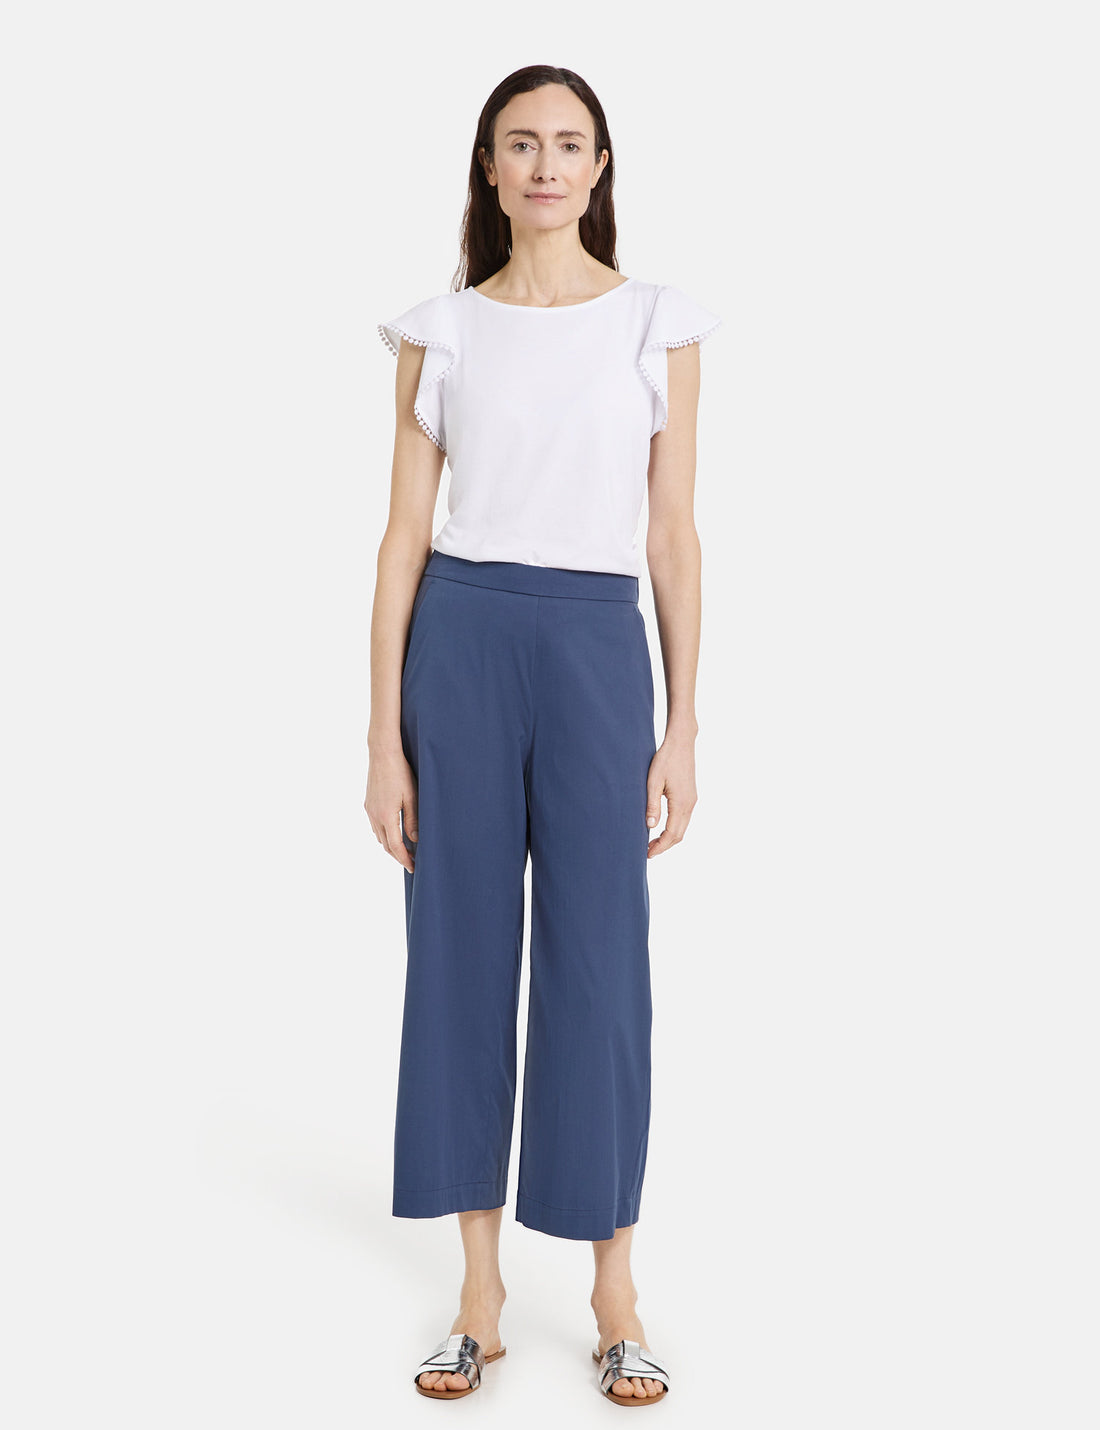 Culottes With A Stretch Waistband At The Back_320023-31594_80936_01